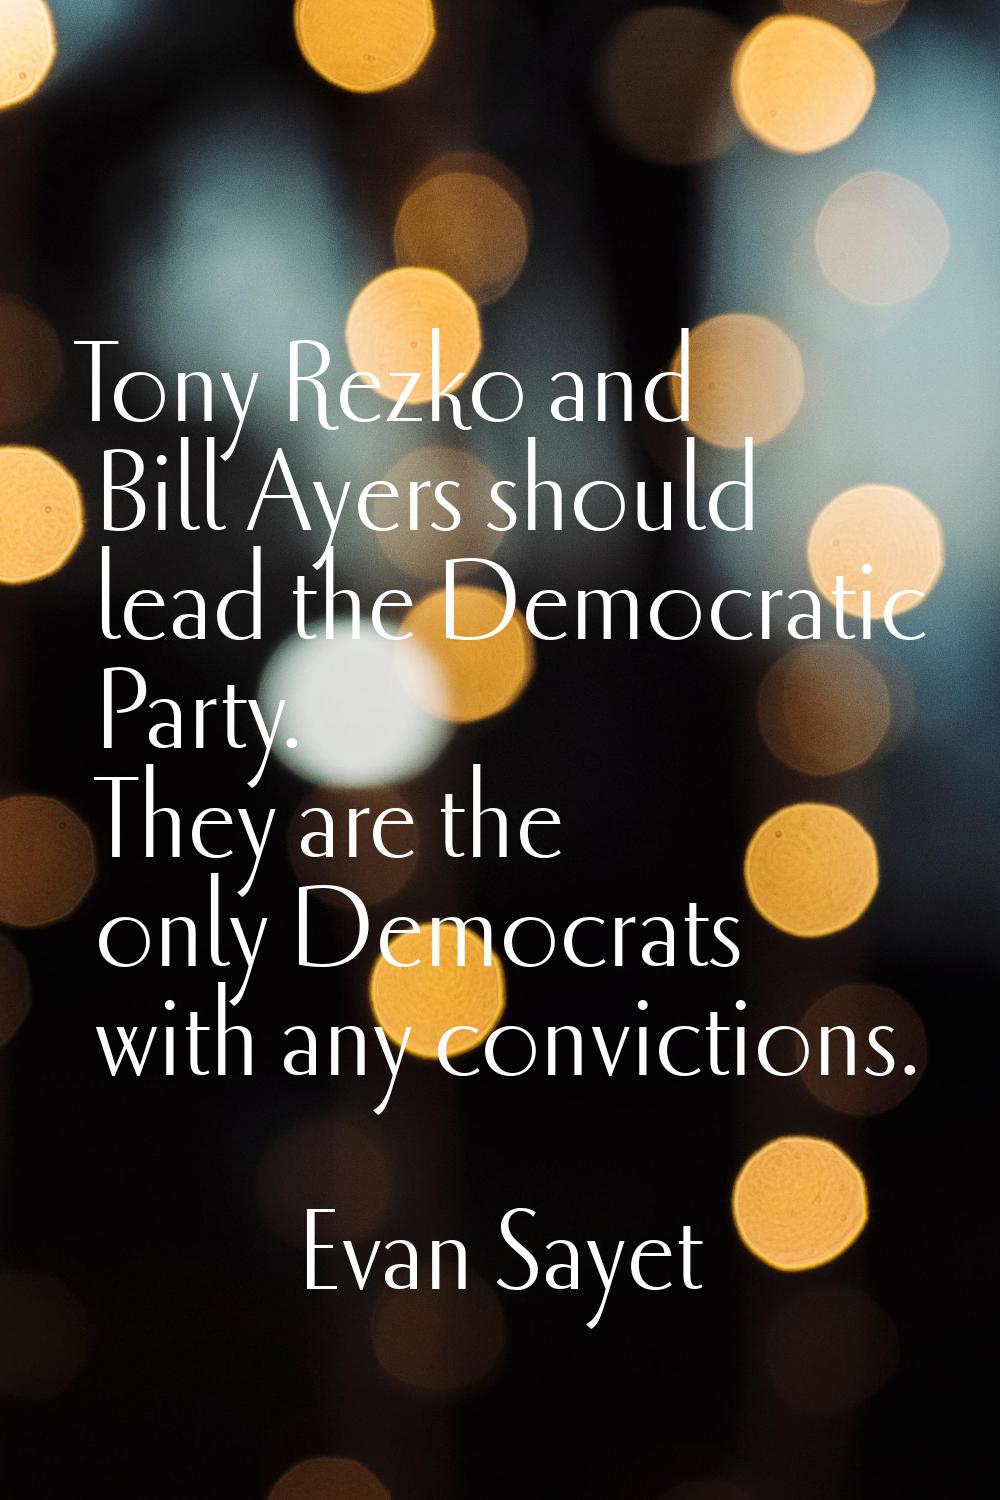 Tony Rezko and Bill Ayers should lead the Democratic Party. They are the only Democrats with any co